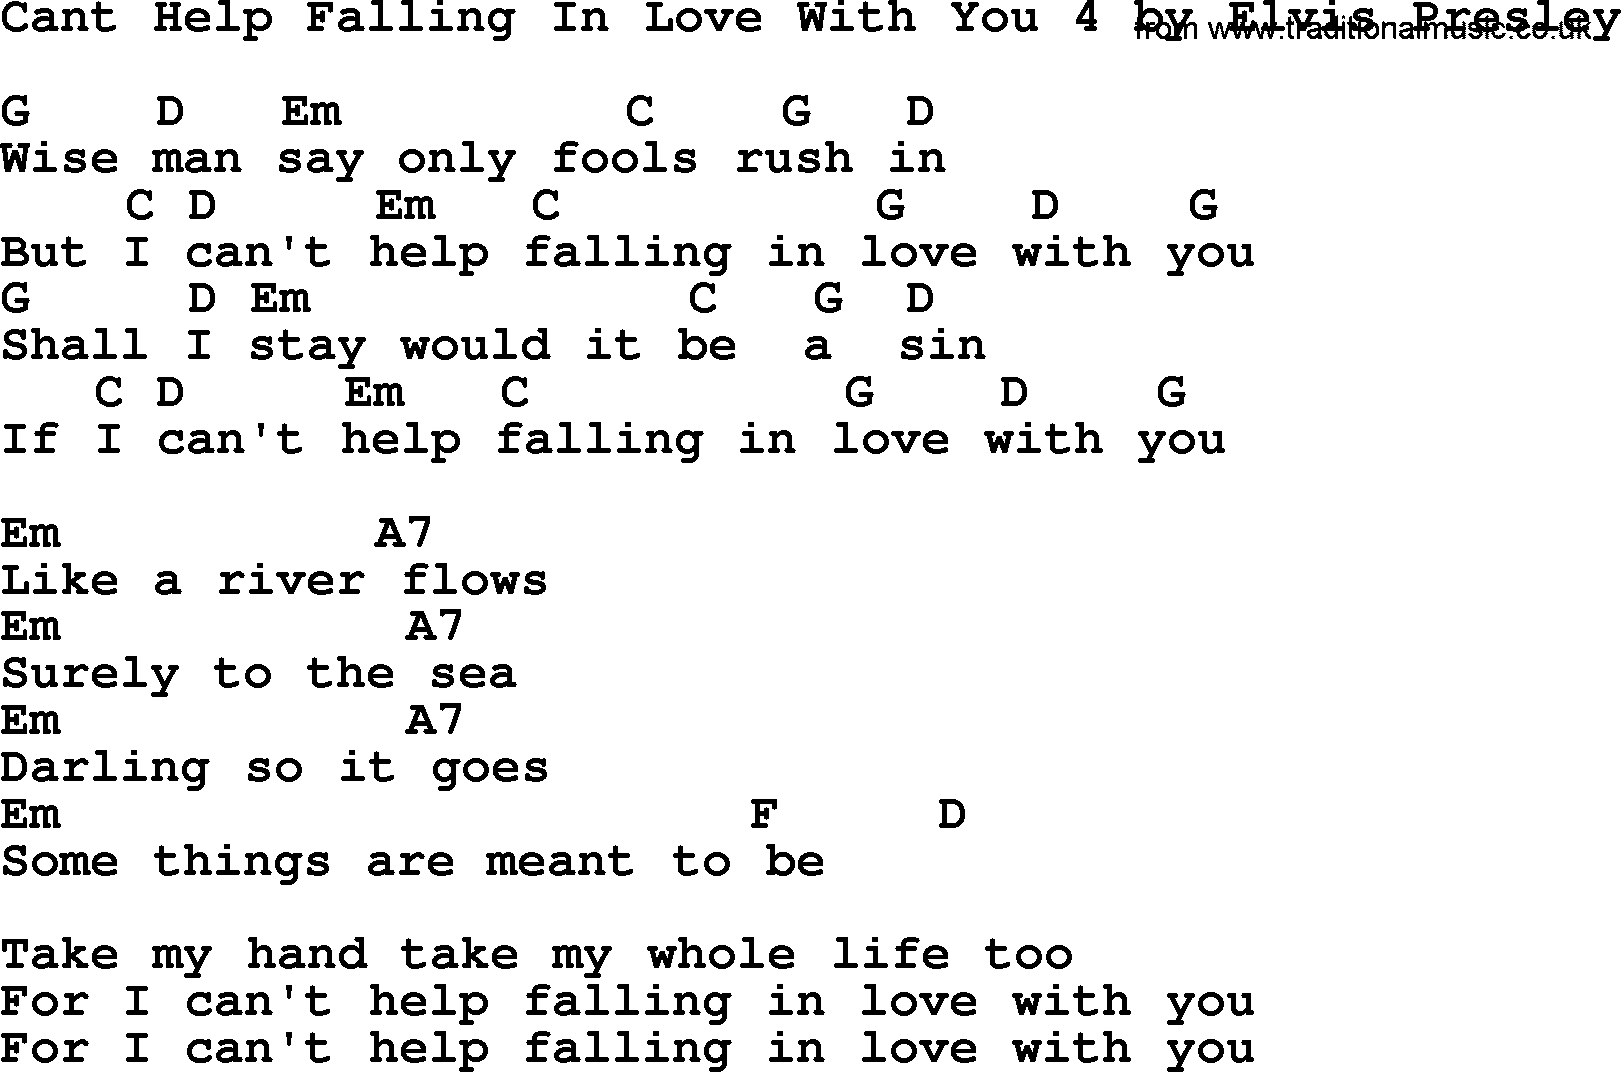 I Can T Help Falling In Love With You Chords Cant Help Falling In Love With You 4 Elvis Presley Lyrics And